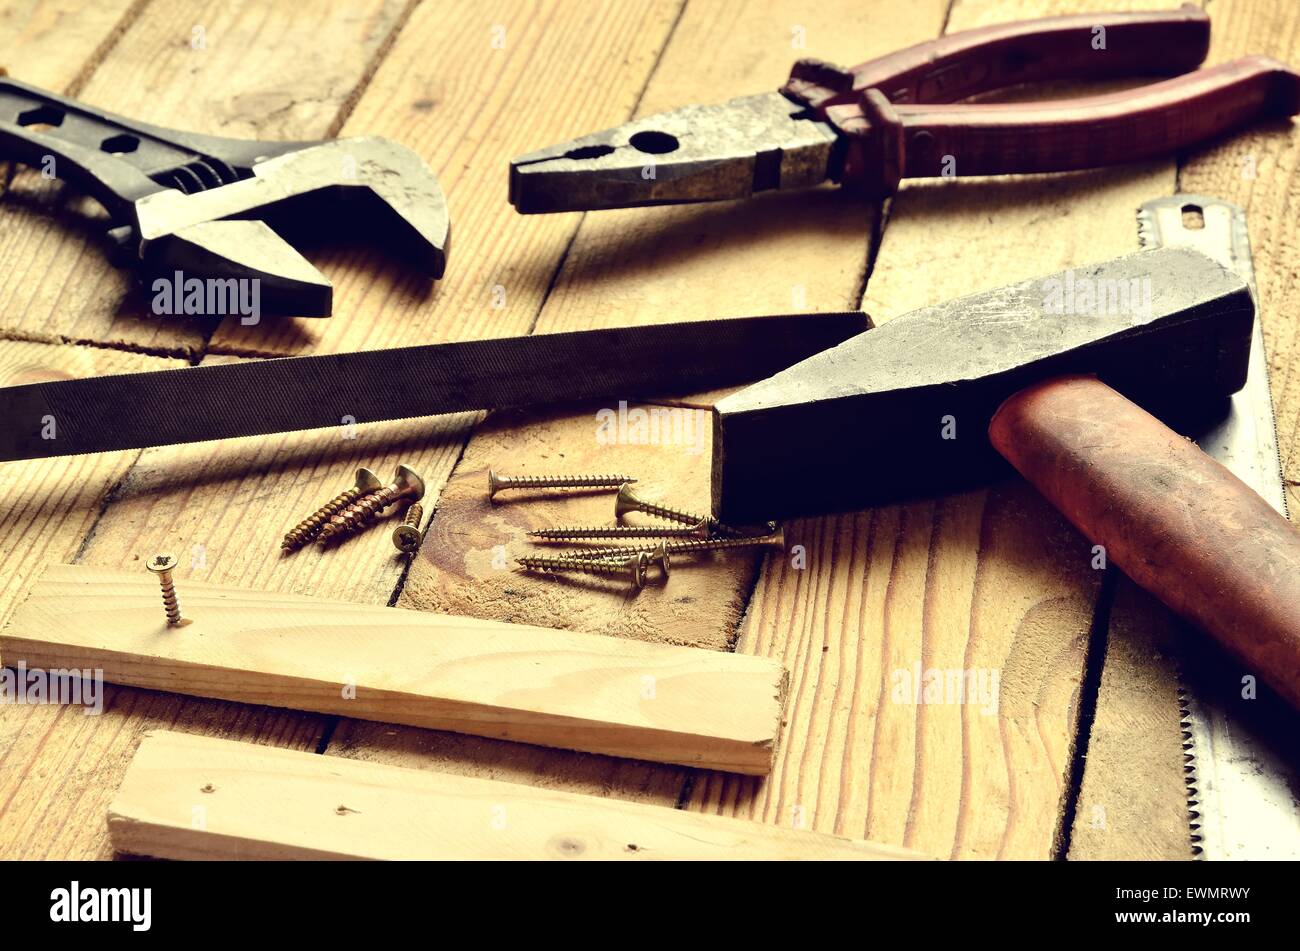 Renovation tools. Hammer, flat file, pliers, monkey wrench, screws, boards and blade on natural wooden background. Stock Photo